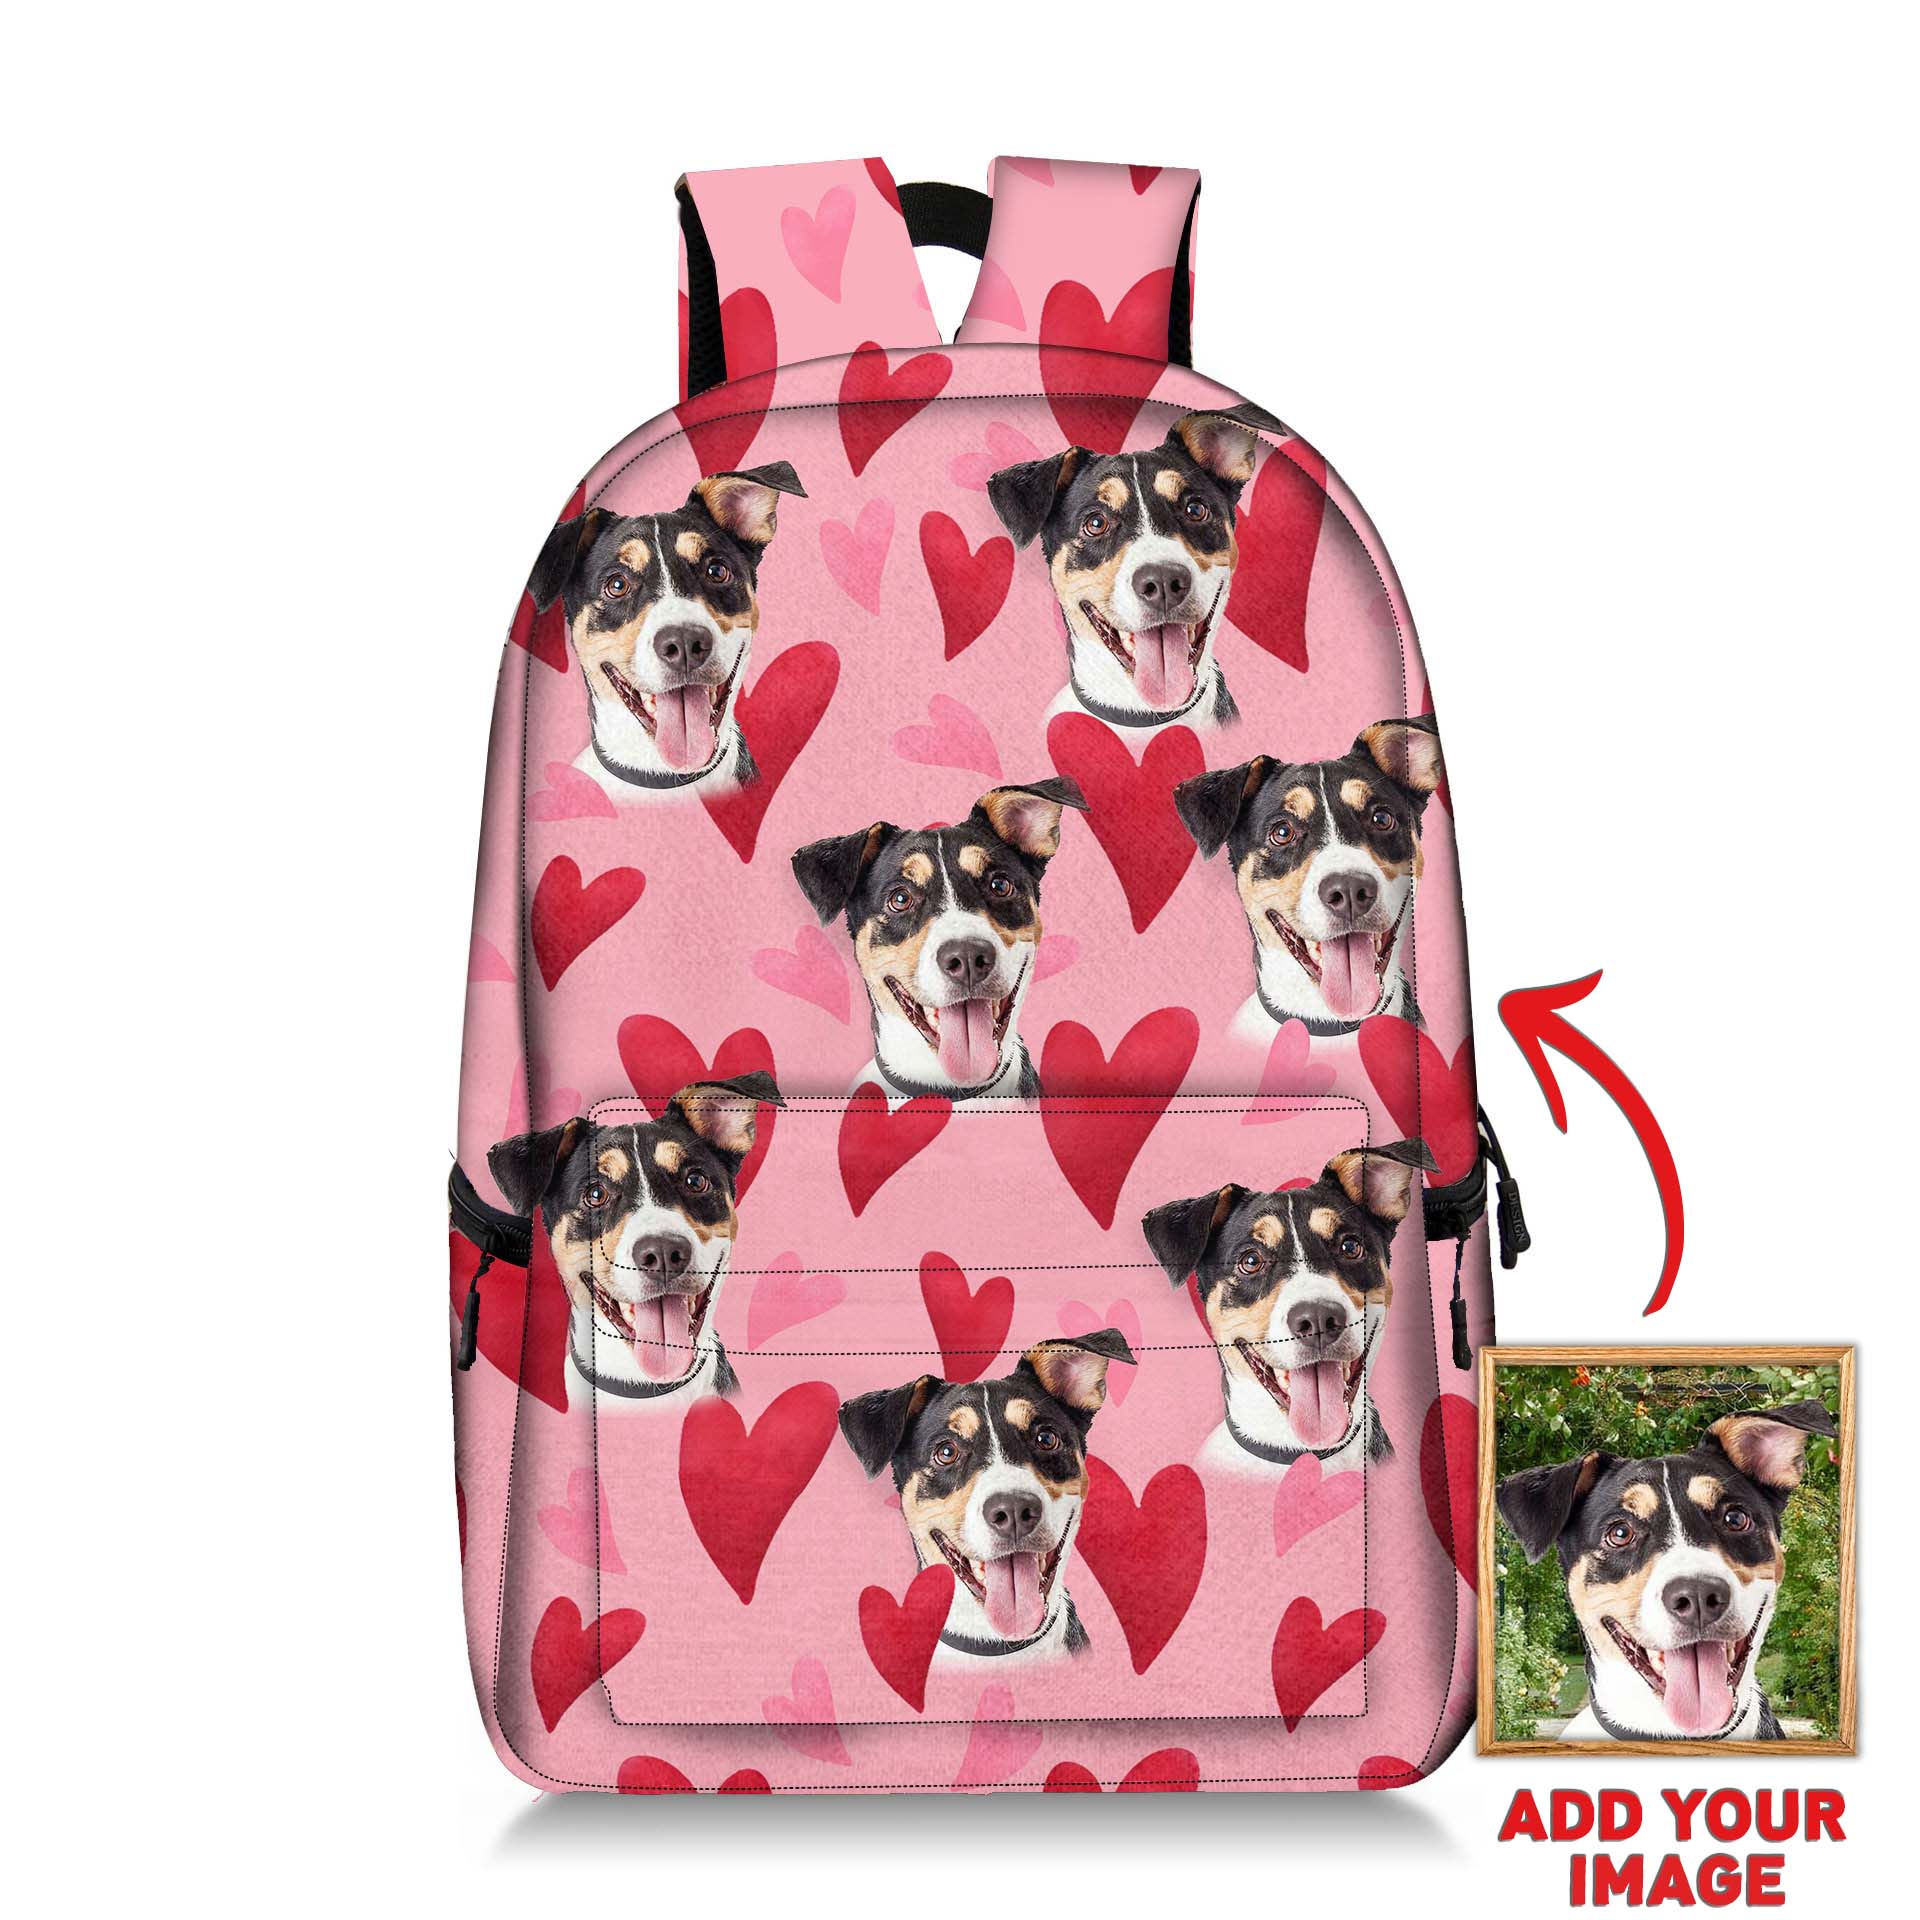 Image of Heart Shape Custom Backpack Gift For Pet Lovers ,,,,, ADD YOUR IMAGE 